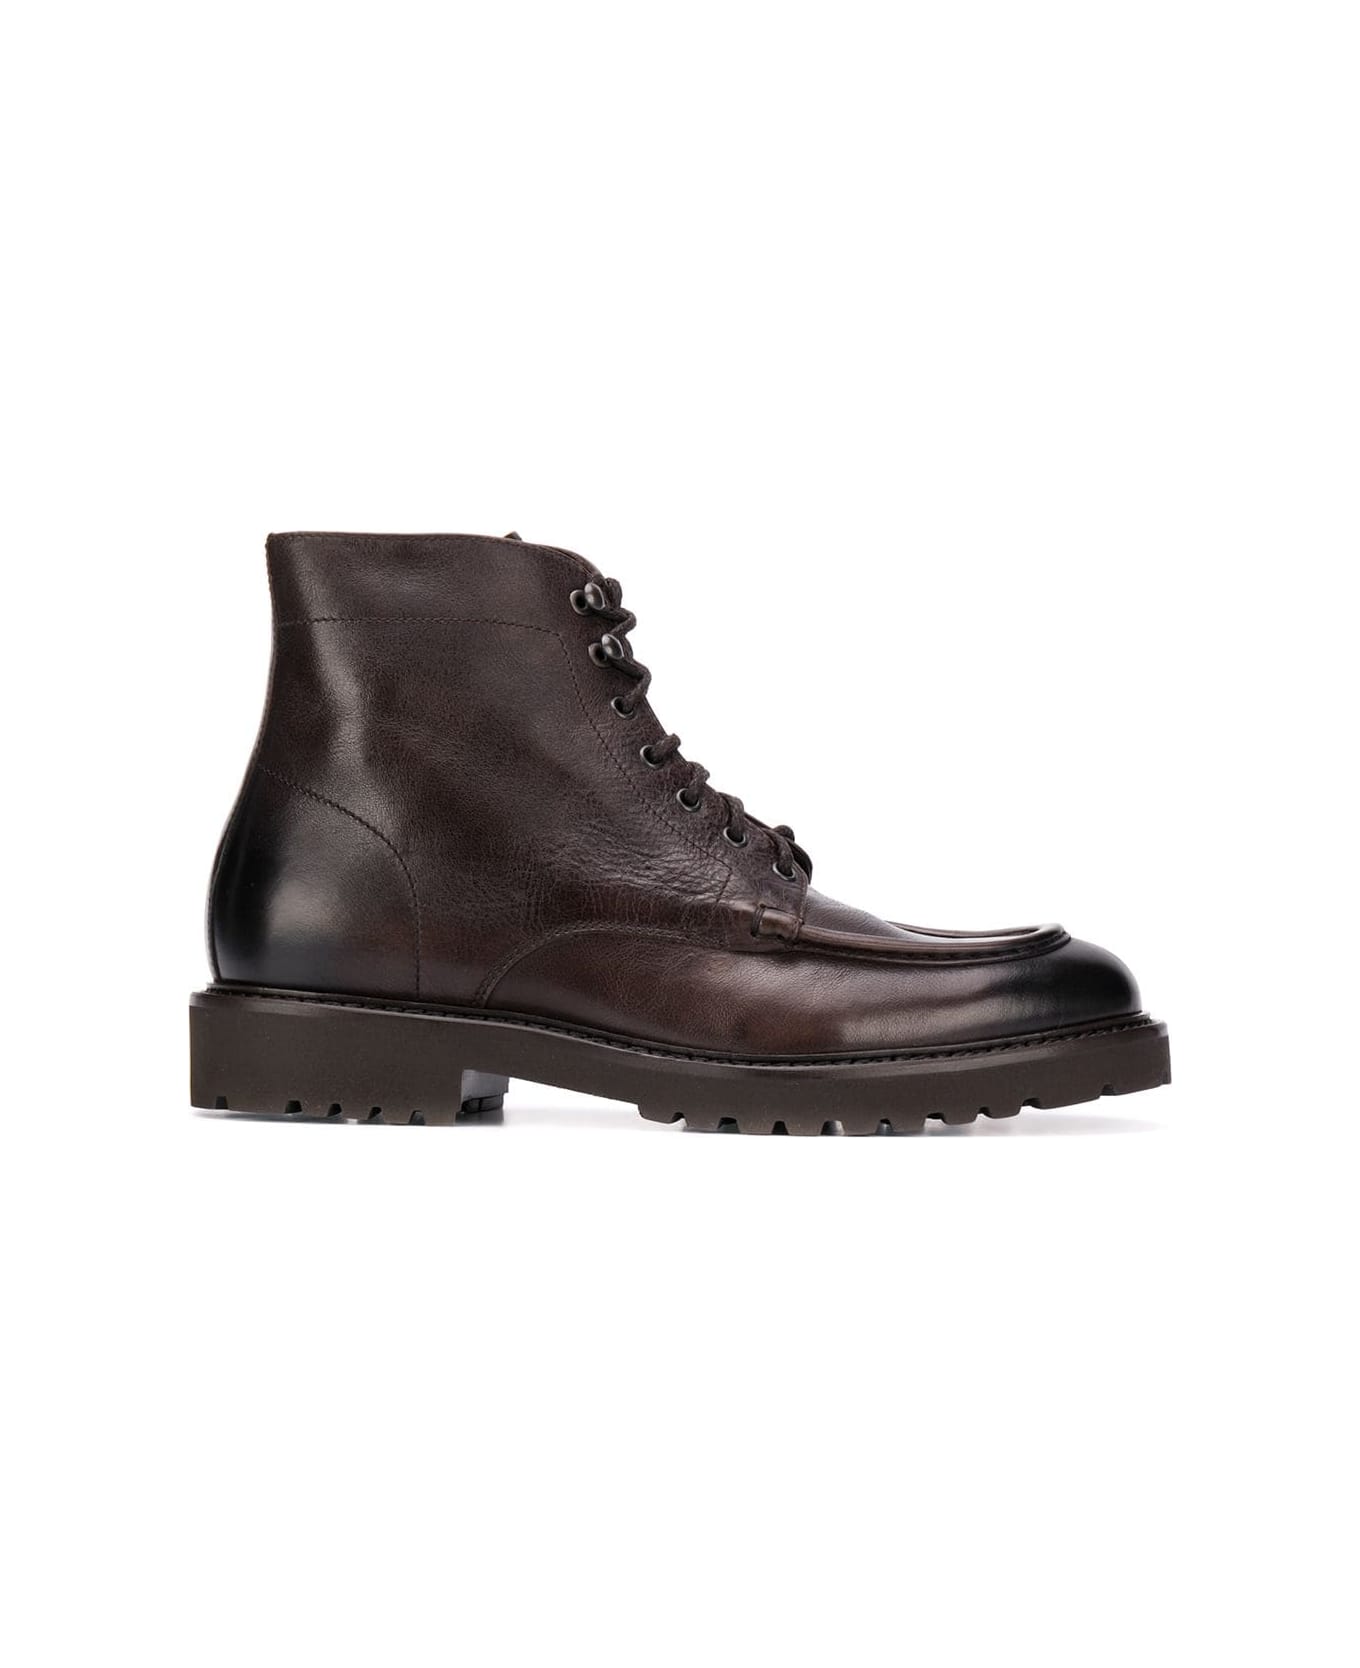 Doucal's Triumph Broadside Derby Boots - Brown ブーツ